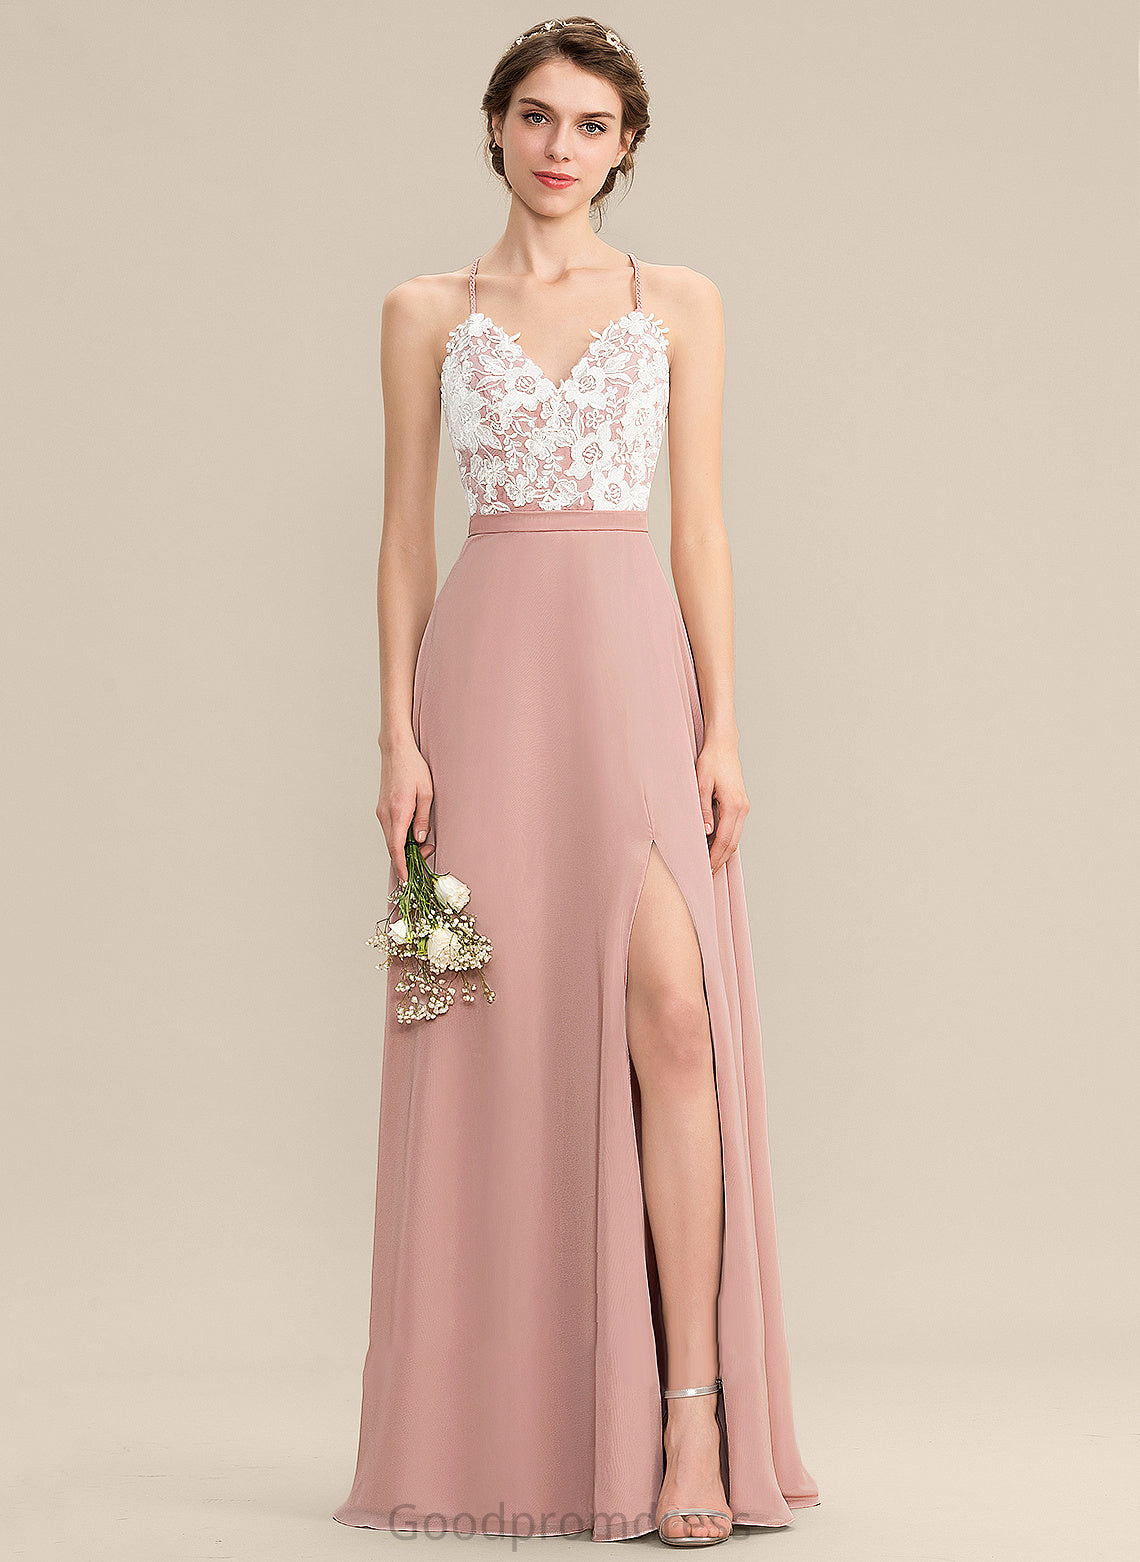 A-Line Alexandria Floor-Length Chiffon Prom Dresses Lace Split With V-neck Front